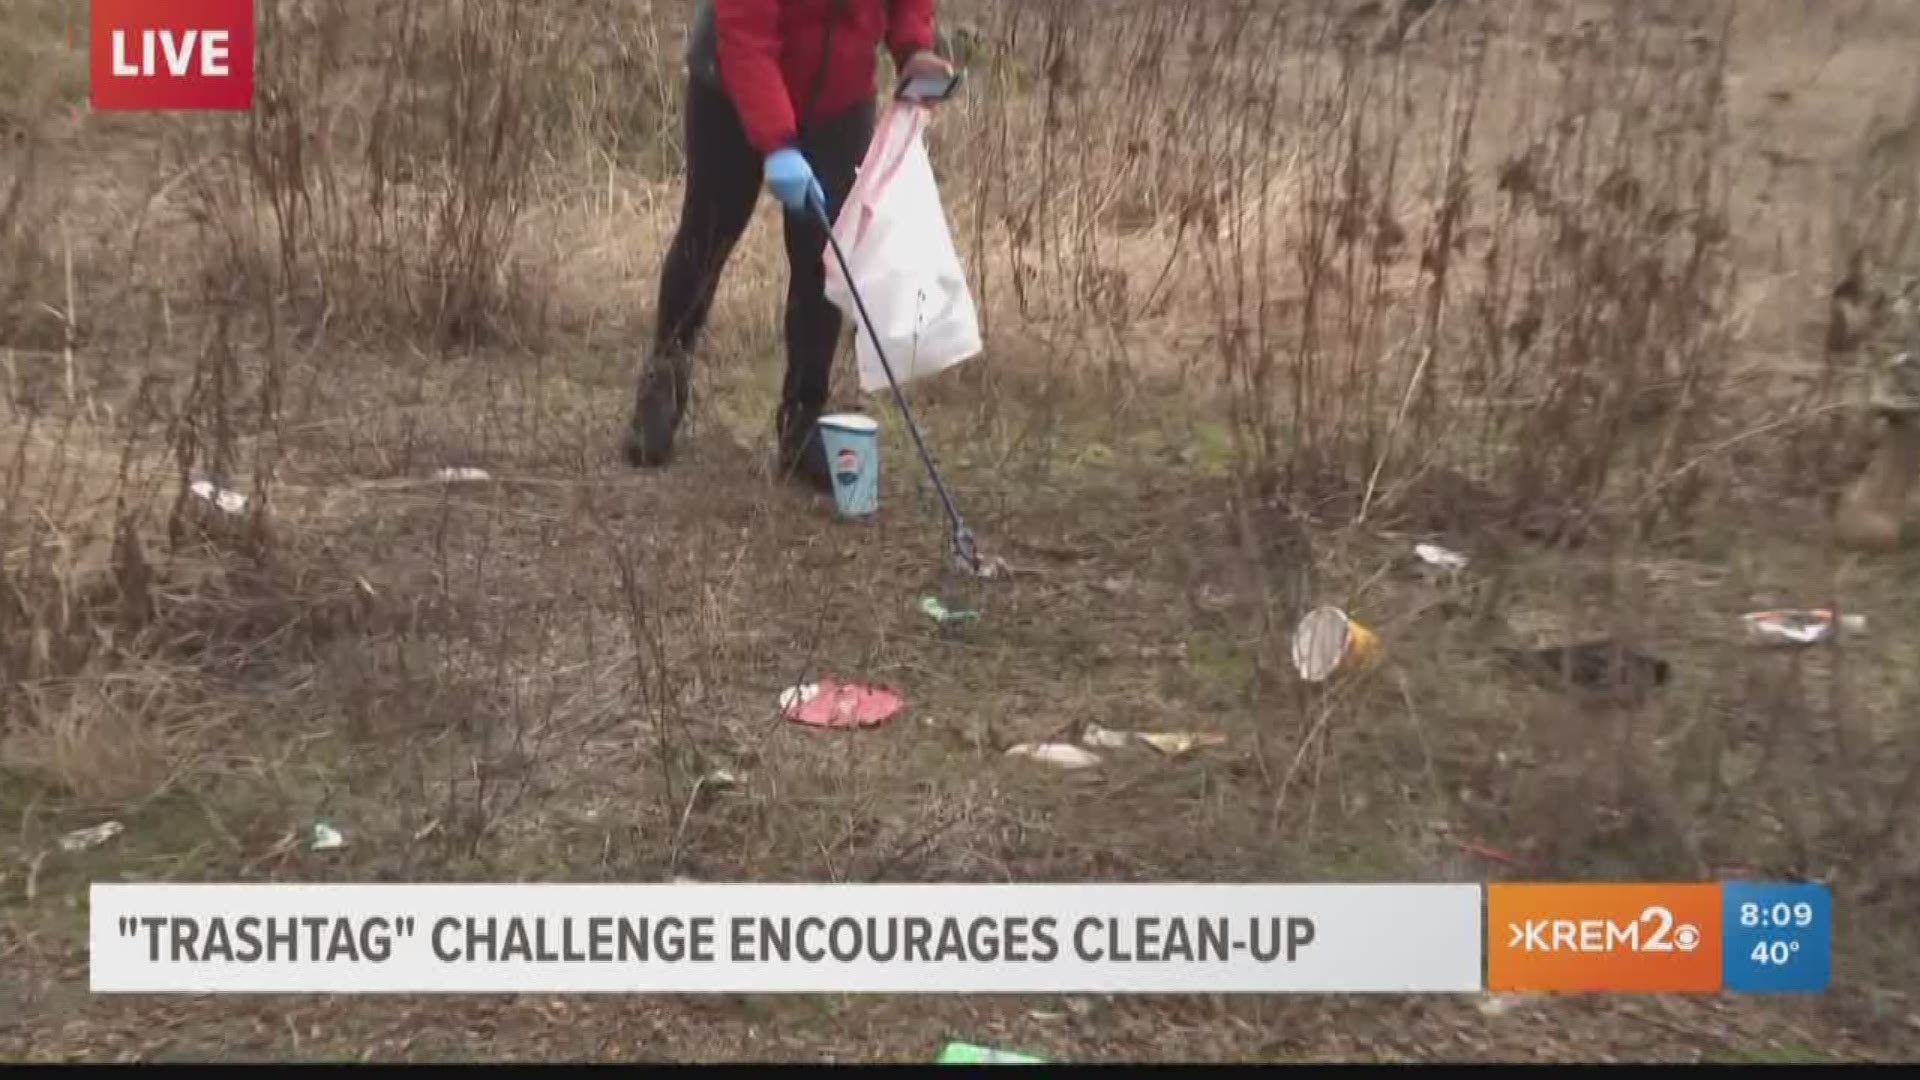 The Trashtag Challenge began after a viral Reddit post telling bored teens to beautify their communities.